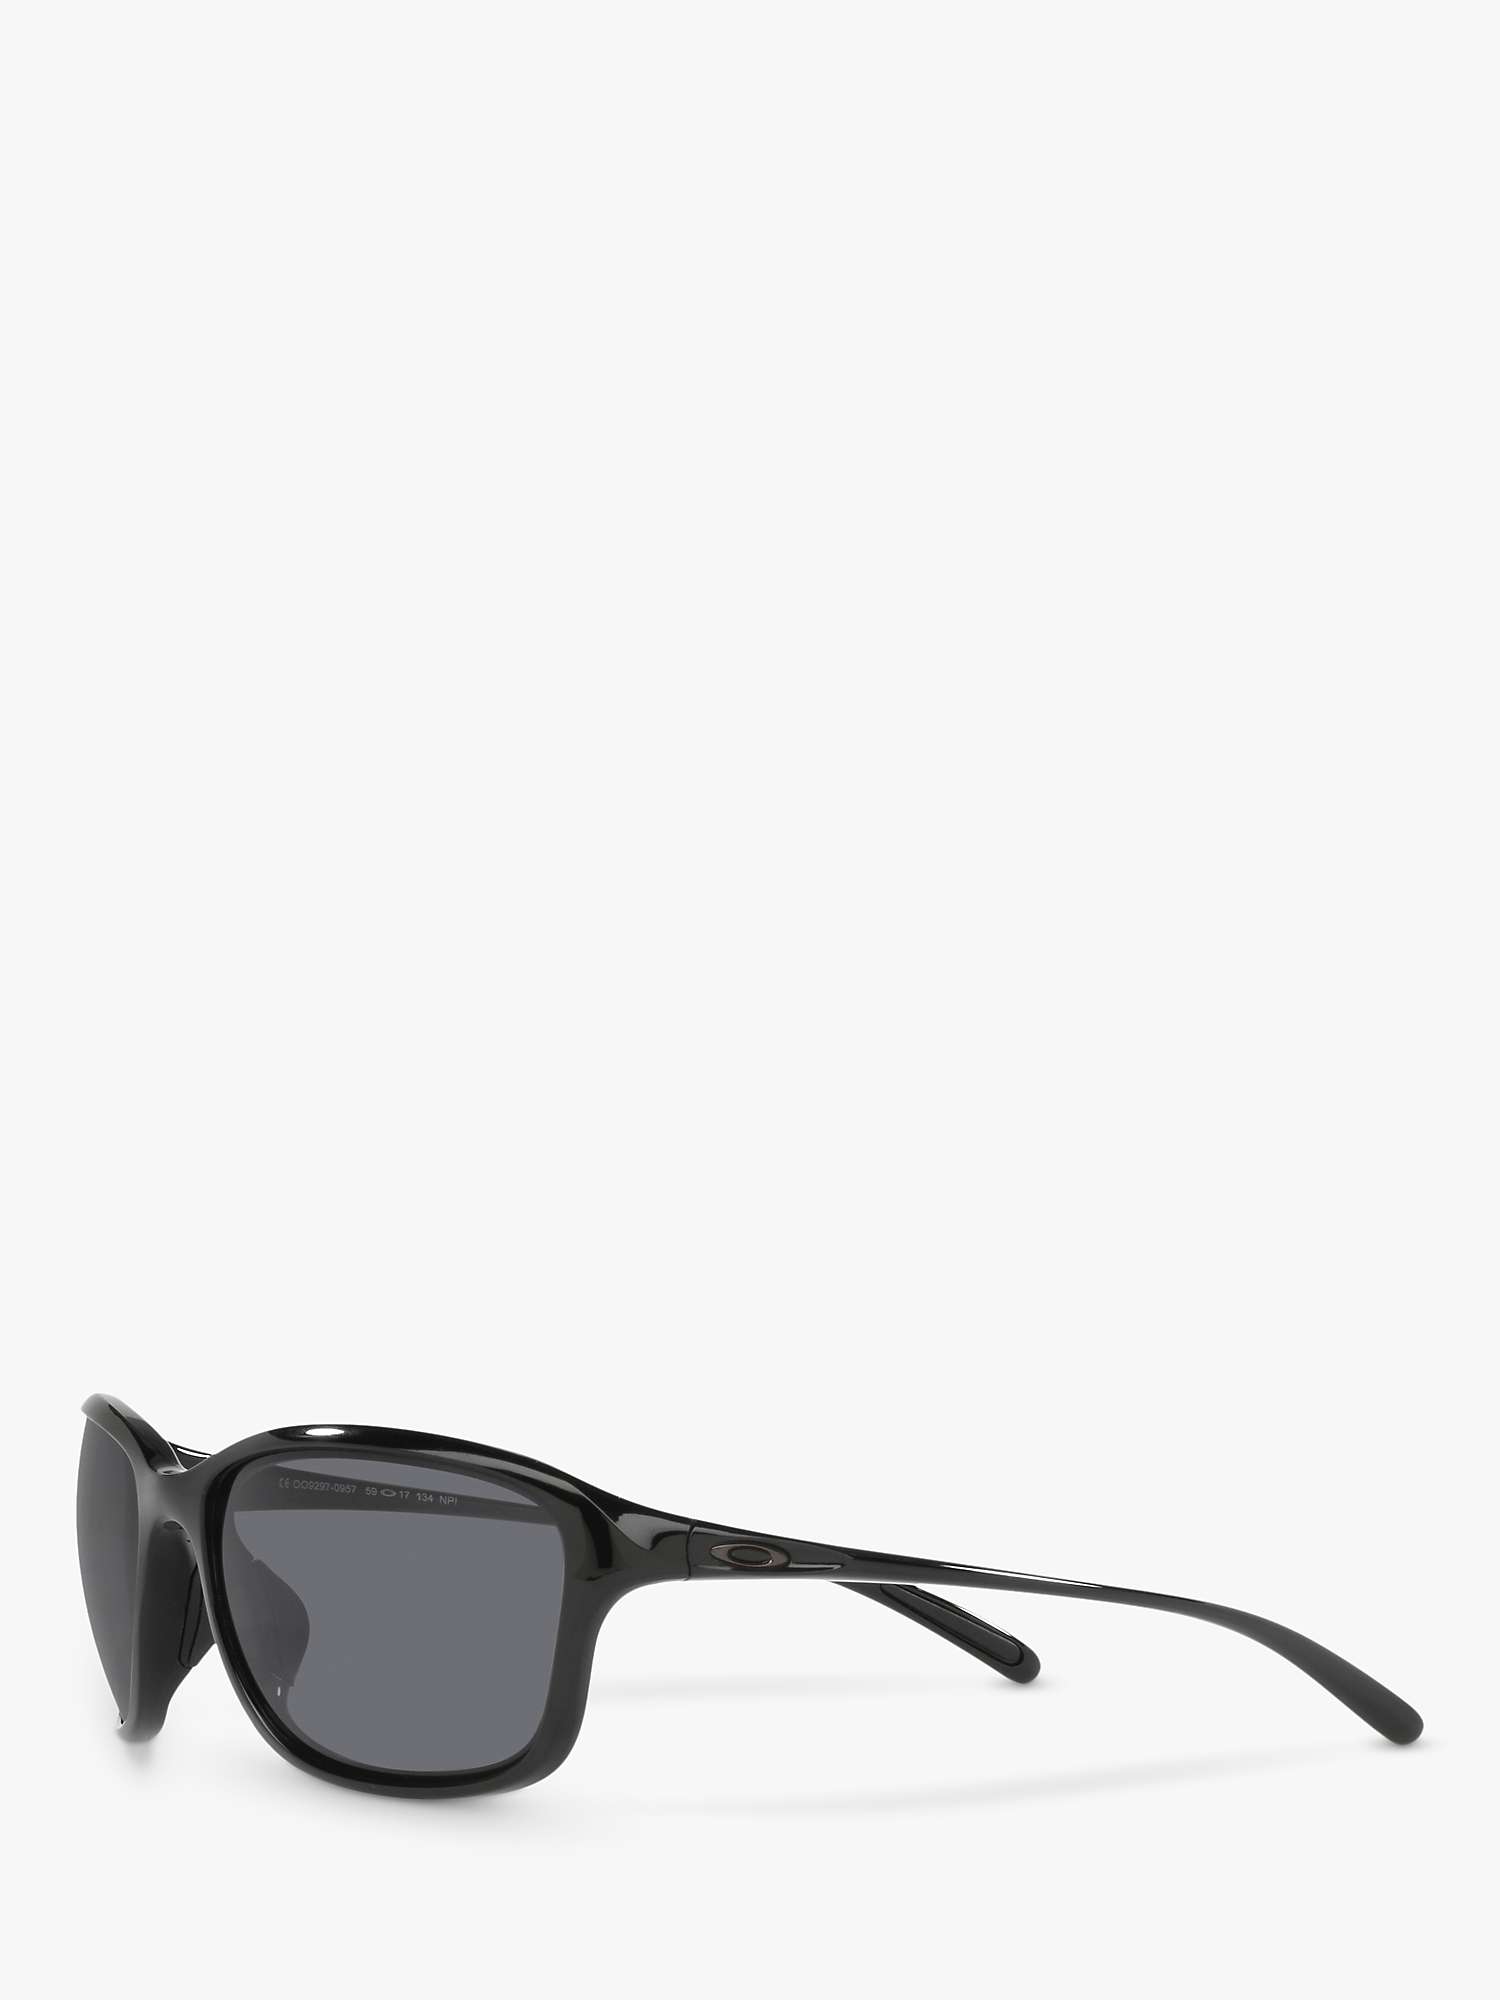 Buy Oakley OO9297 Women's She's Unstoppable Oval Sunglasses Online at johnlewis.com